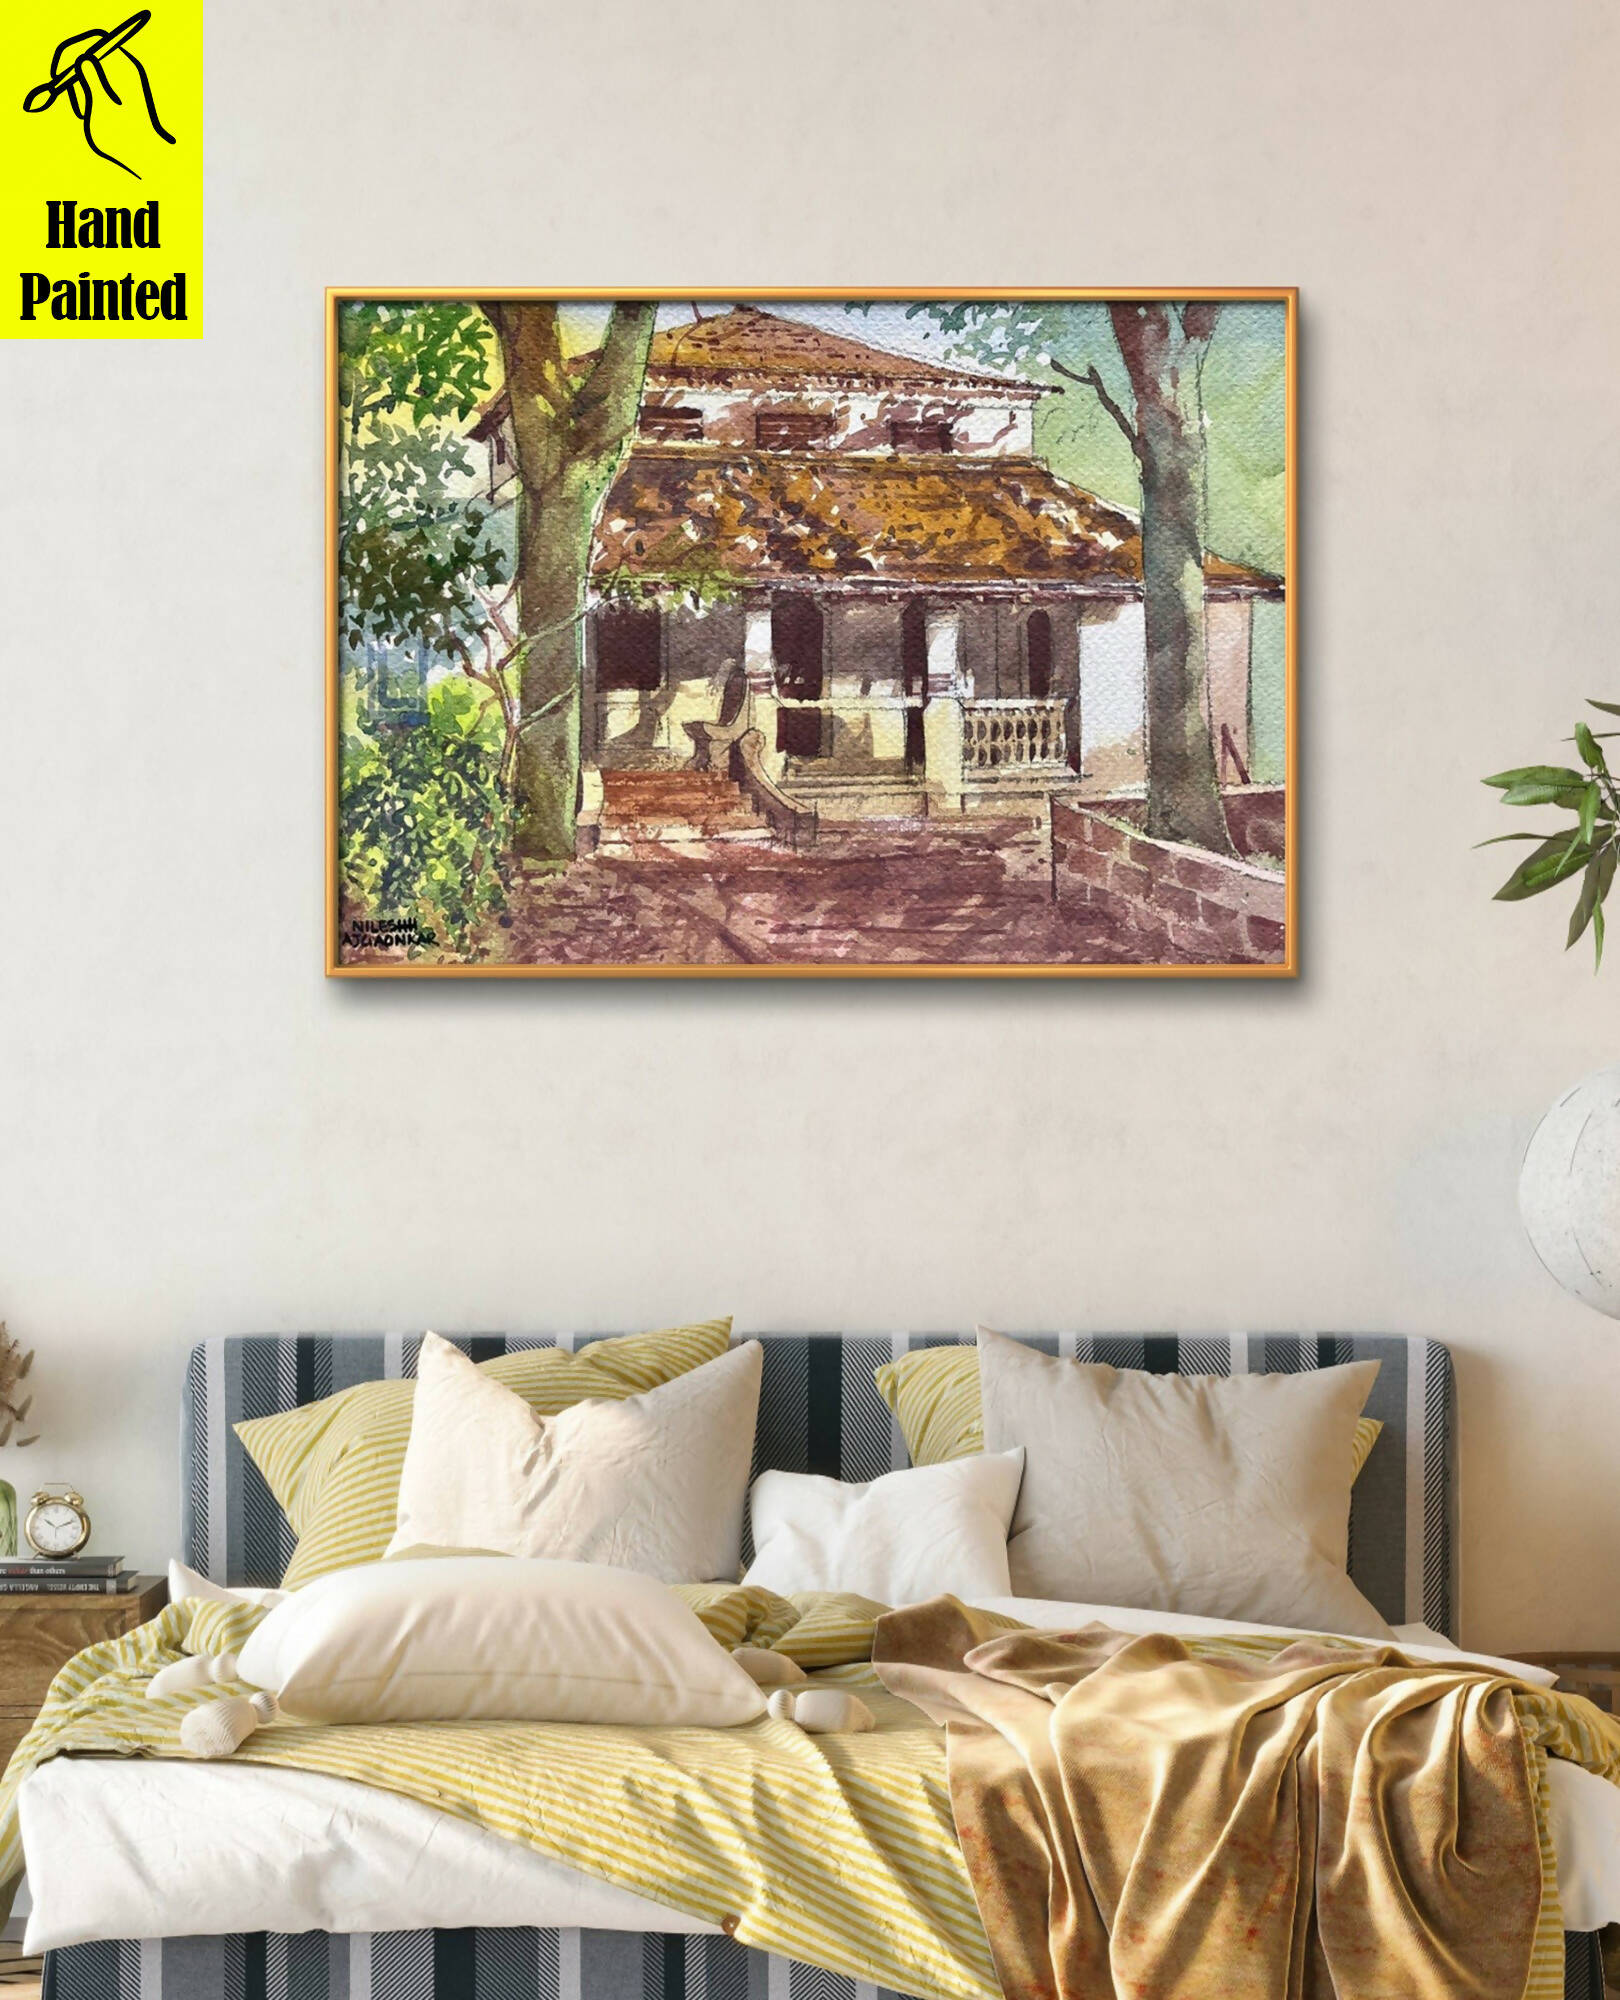 Title: Goan heritage house with two jackfruit trees